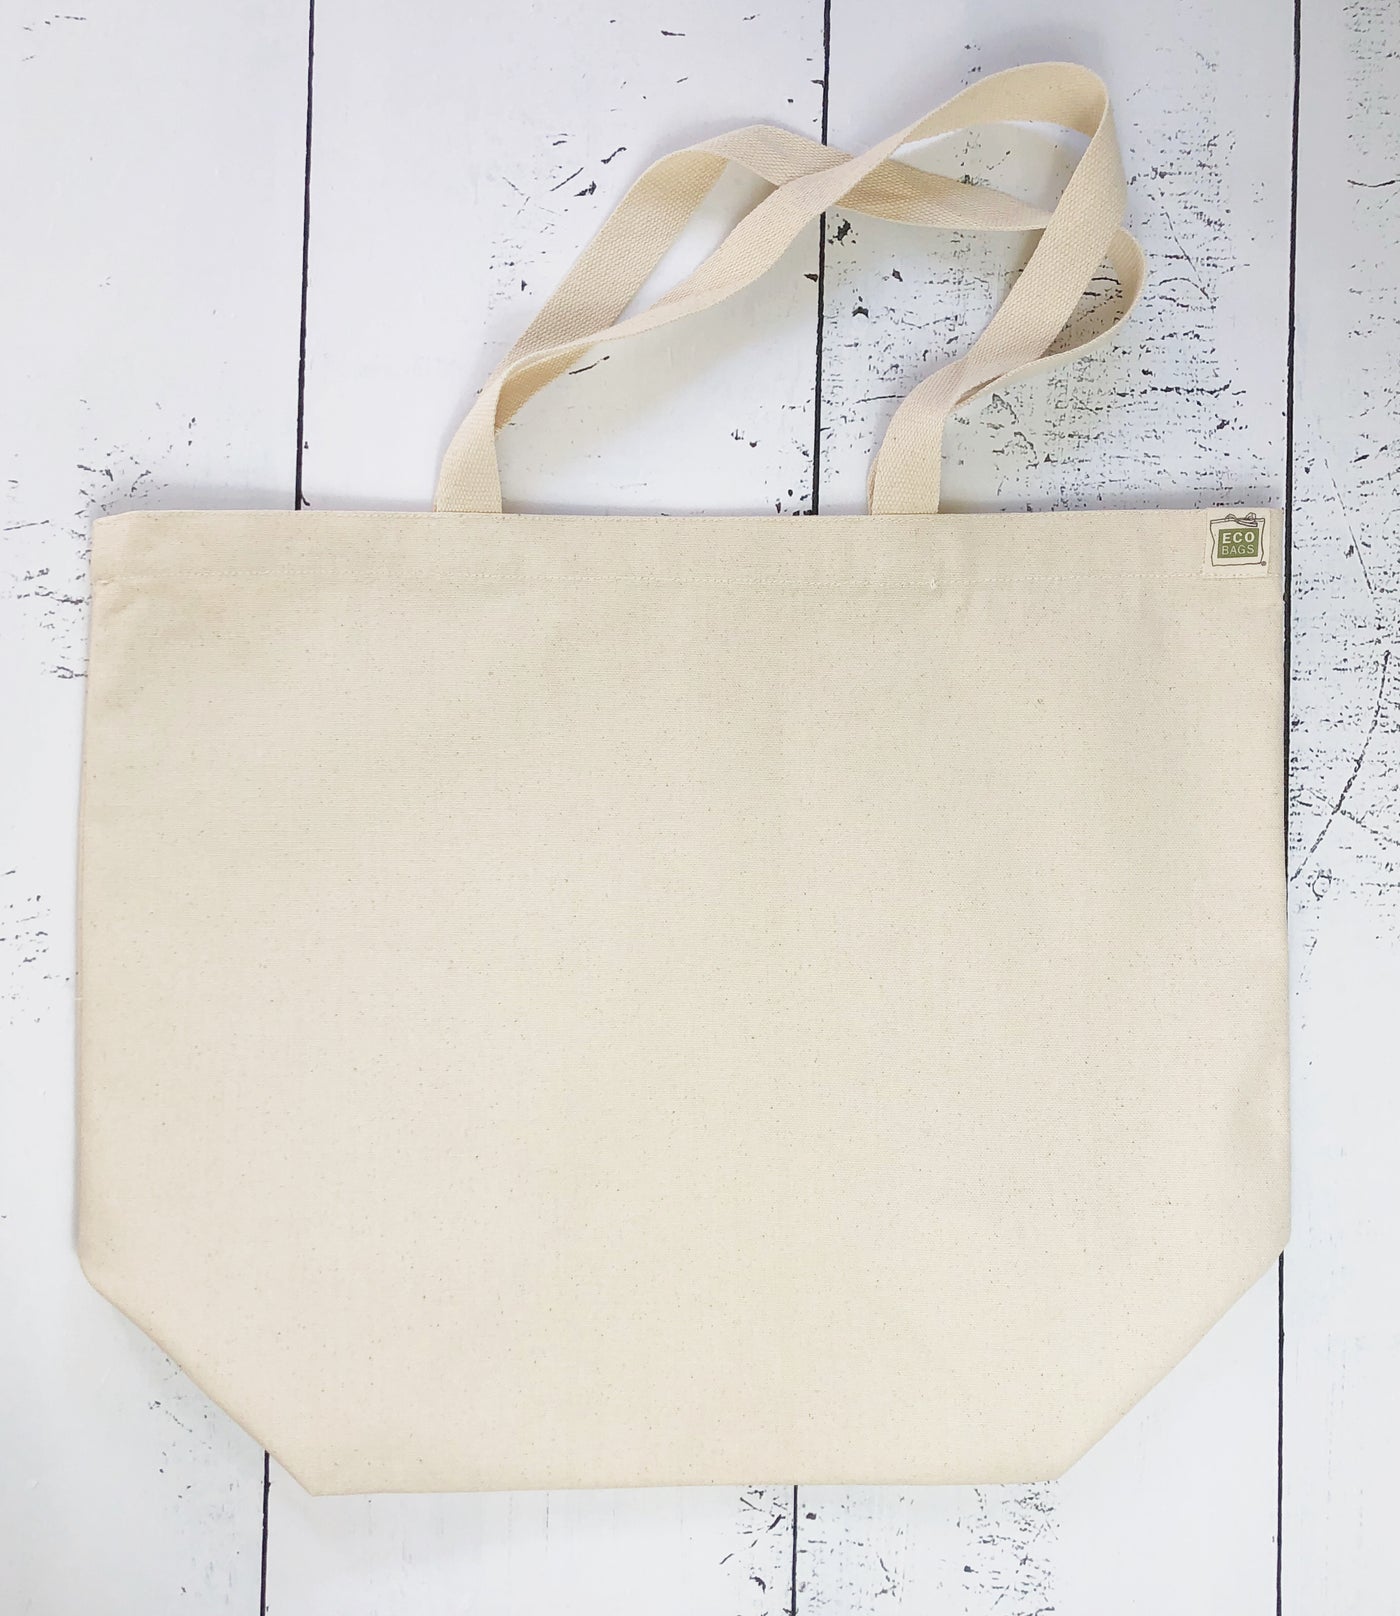 canvas tote bag with handles - Pretty Clever Words